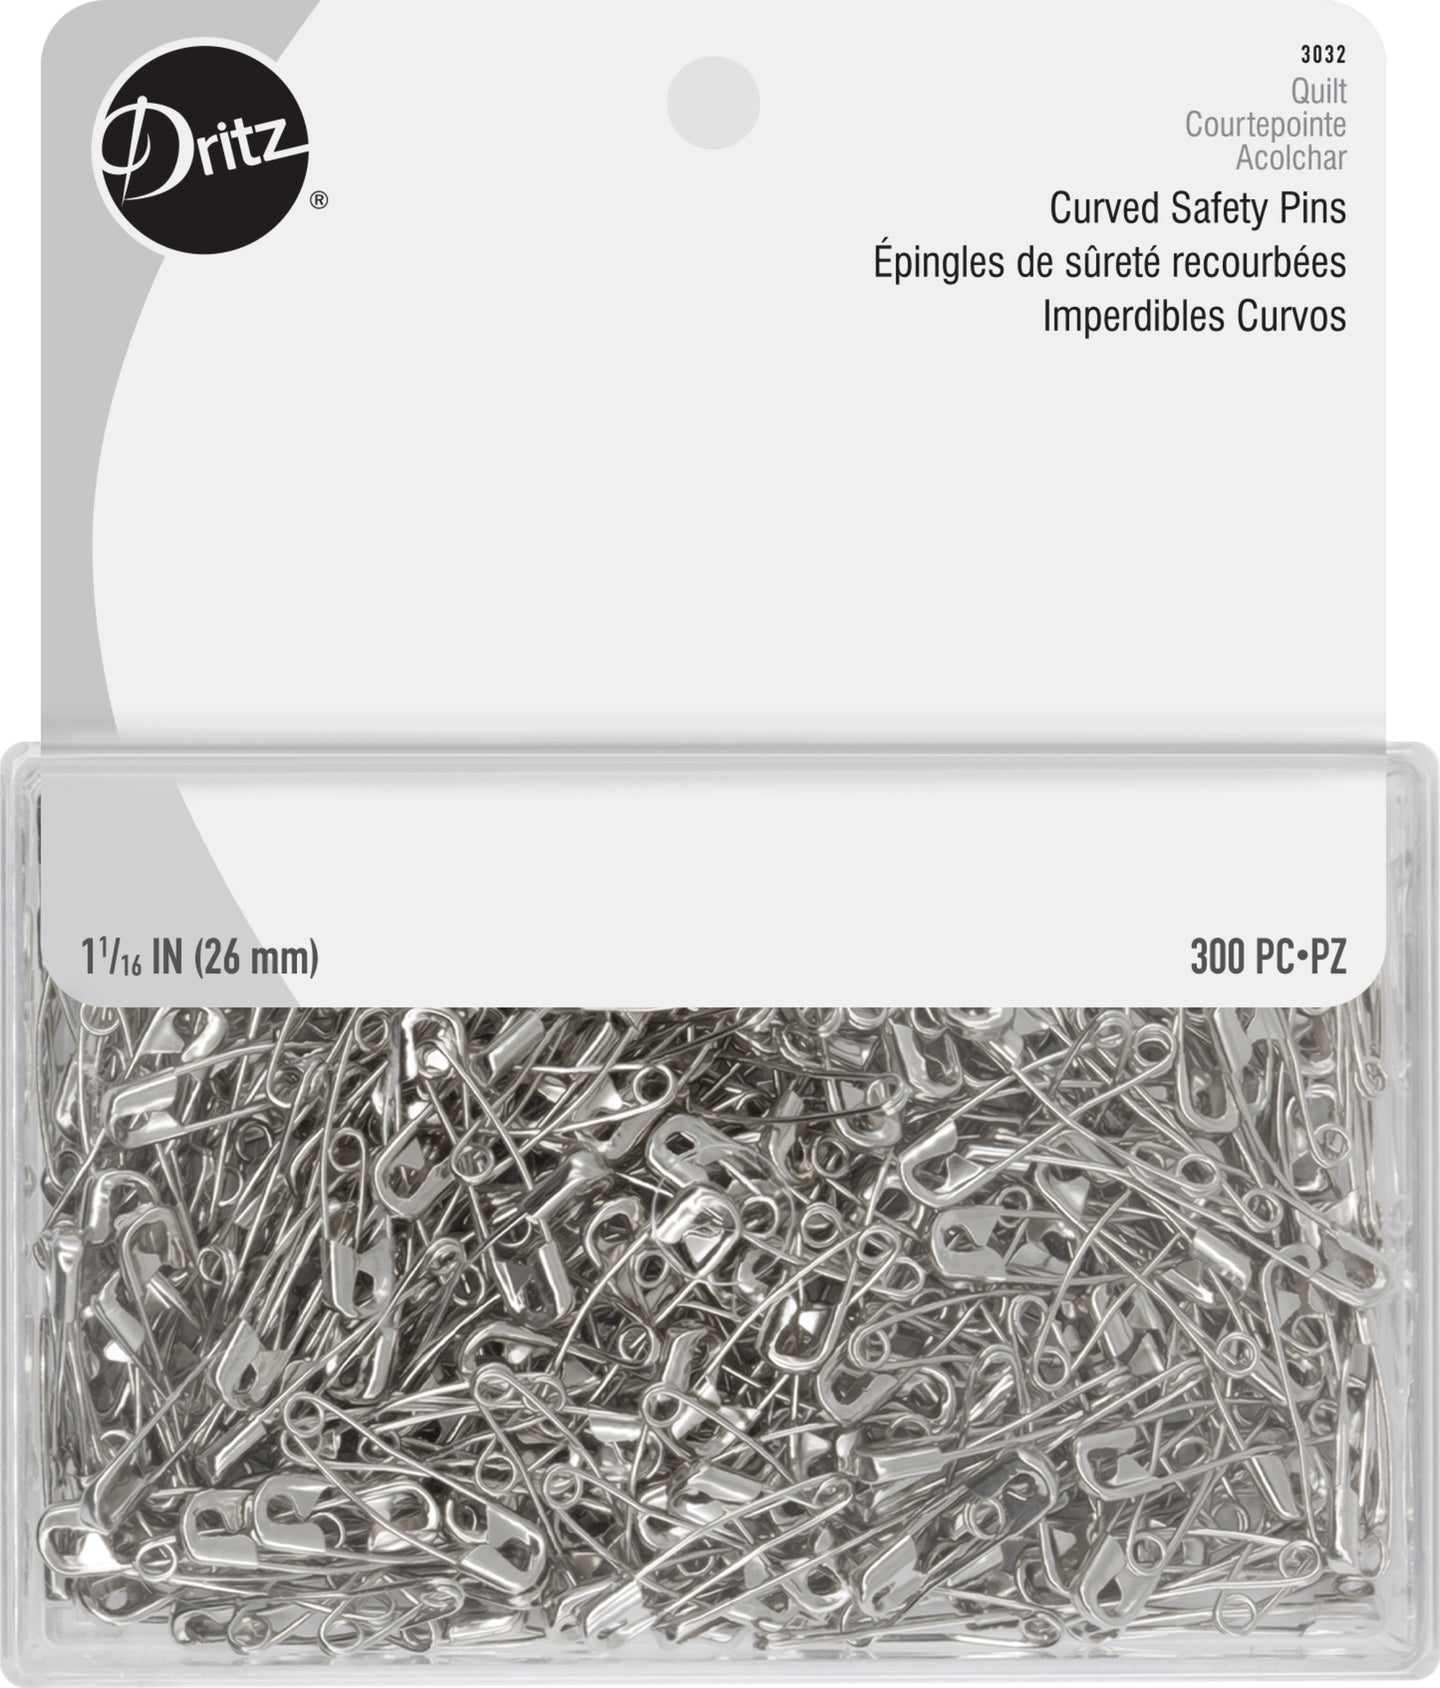 TSHD 100 Pack Curved Safety Pins 1.5 inch Size 2 for Quilting  Sewing，Basting Pins